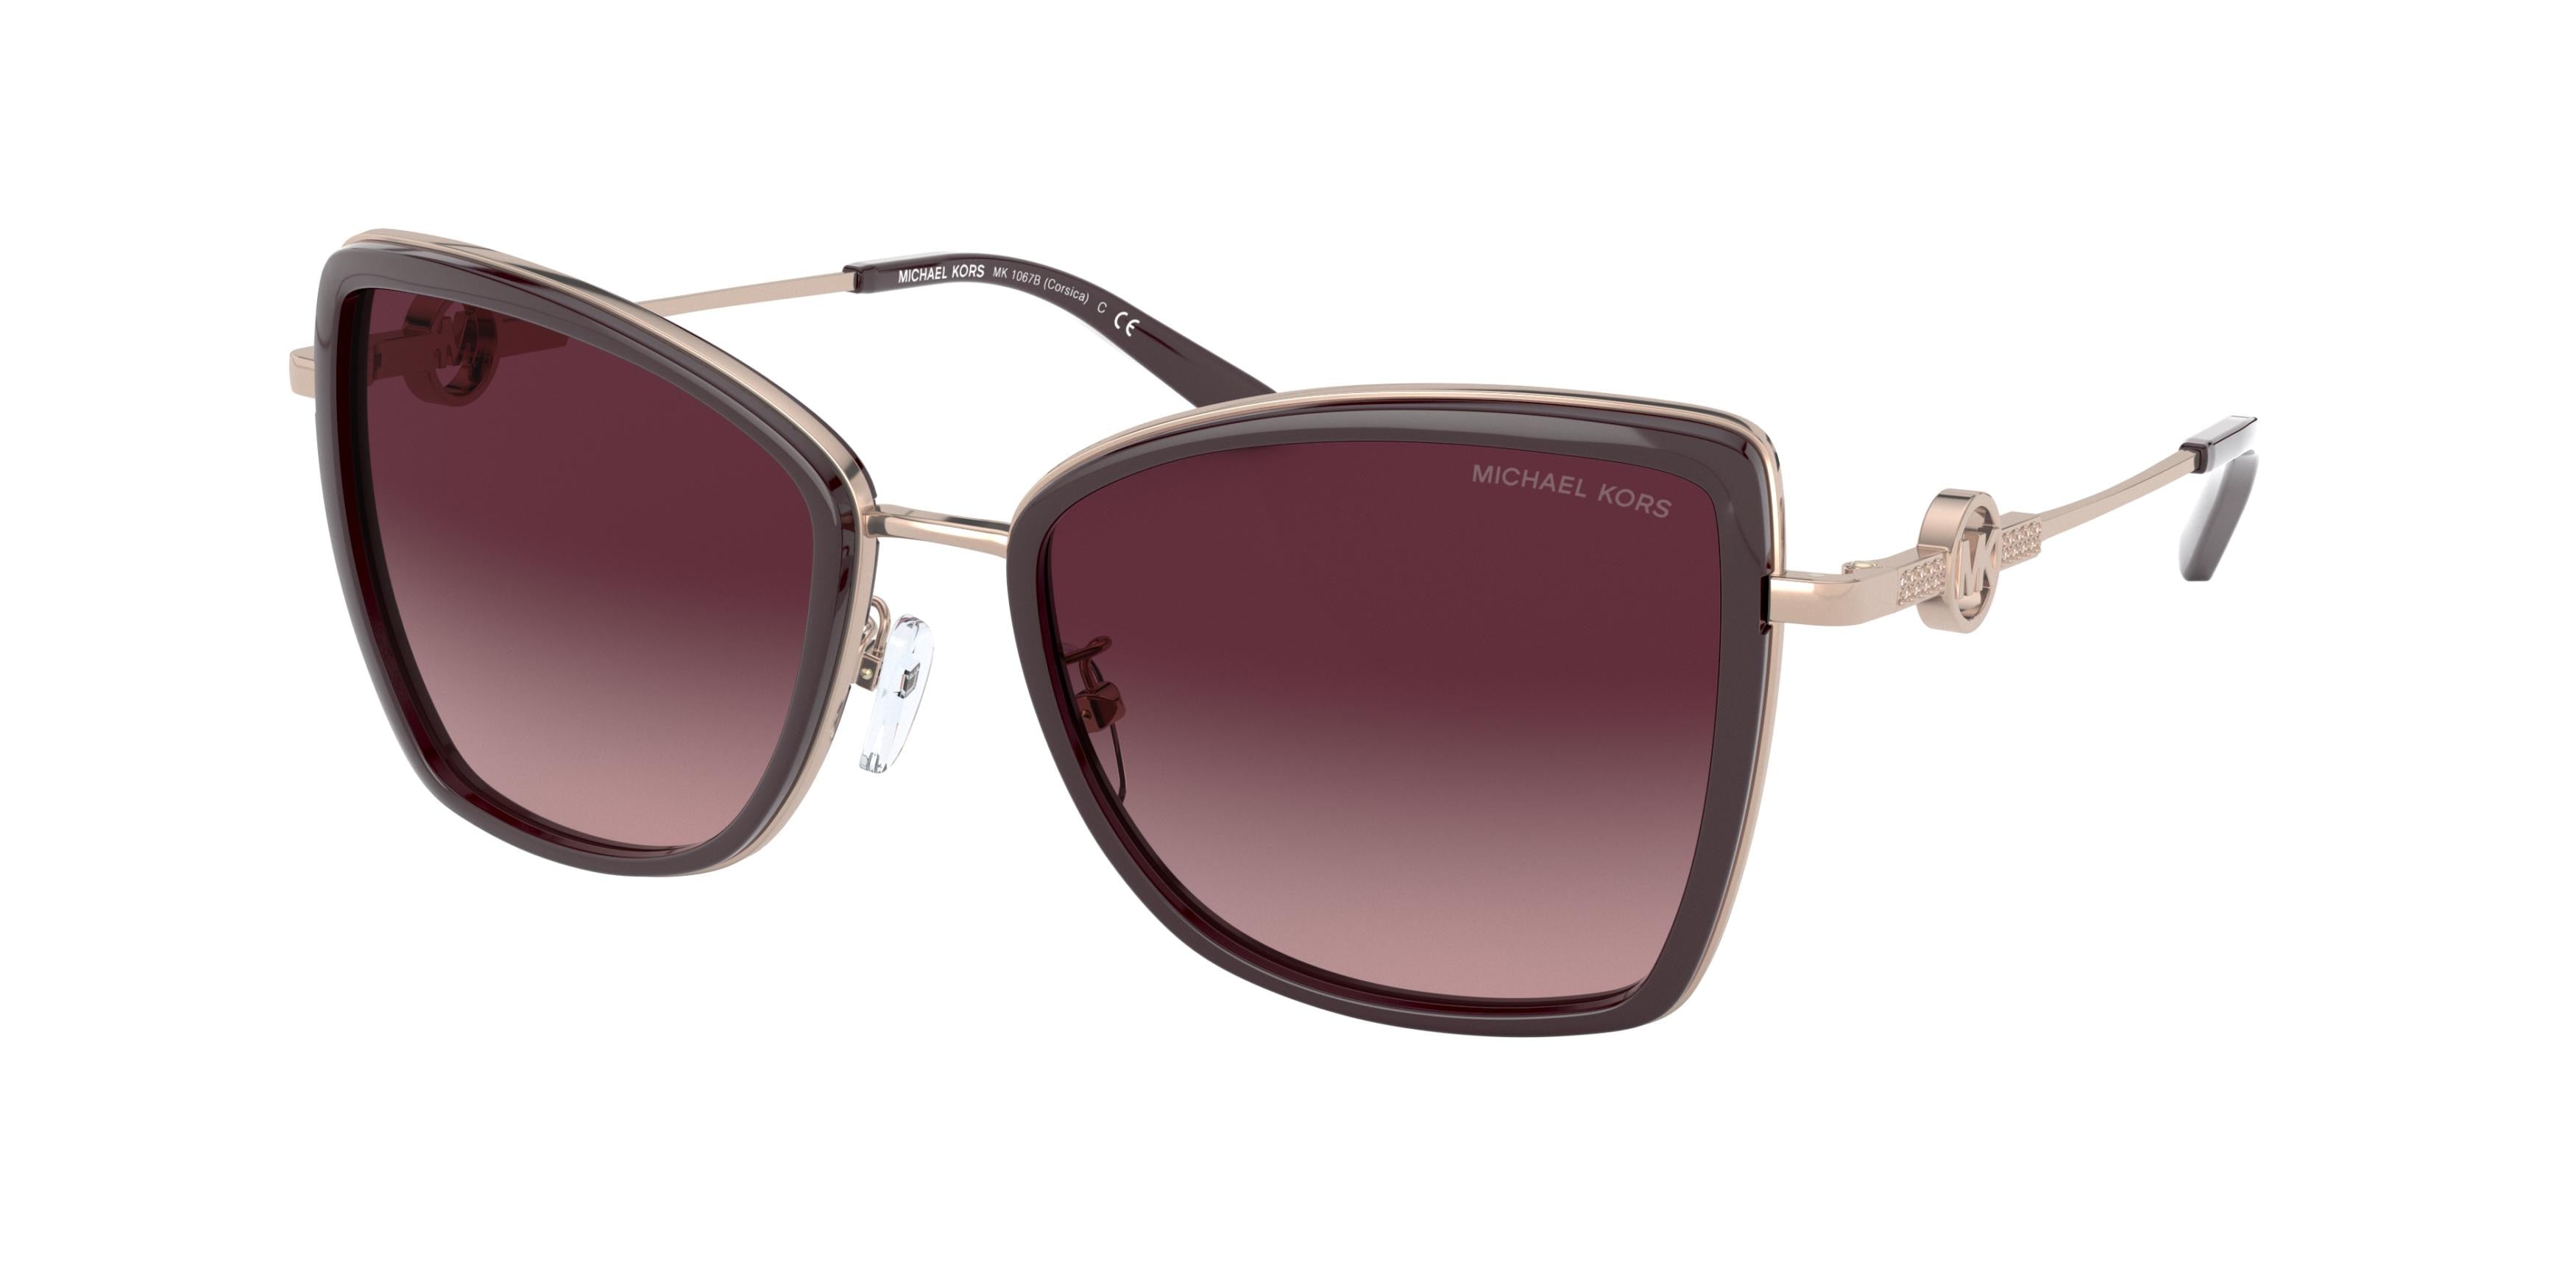 Michael Kors CORSICA MK1067B Butterfly Sunglasses  11088H-Rose Gold/Cordovan 55-140-18 - Color Map Gold